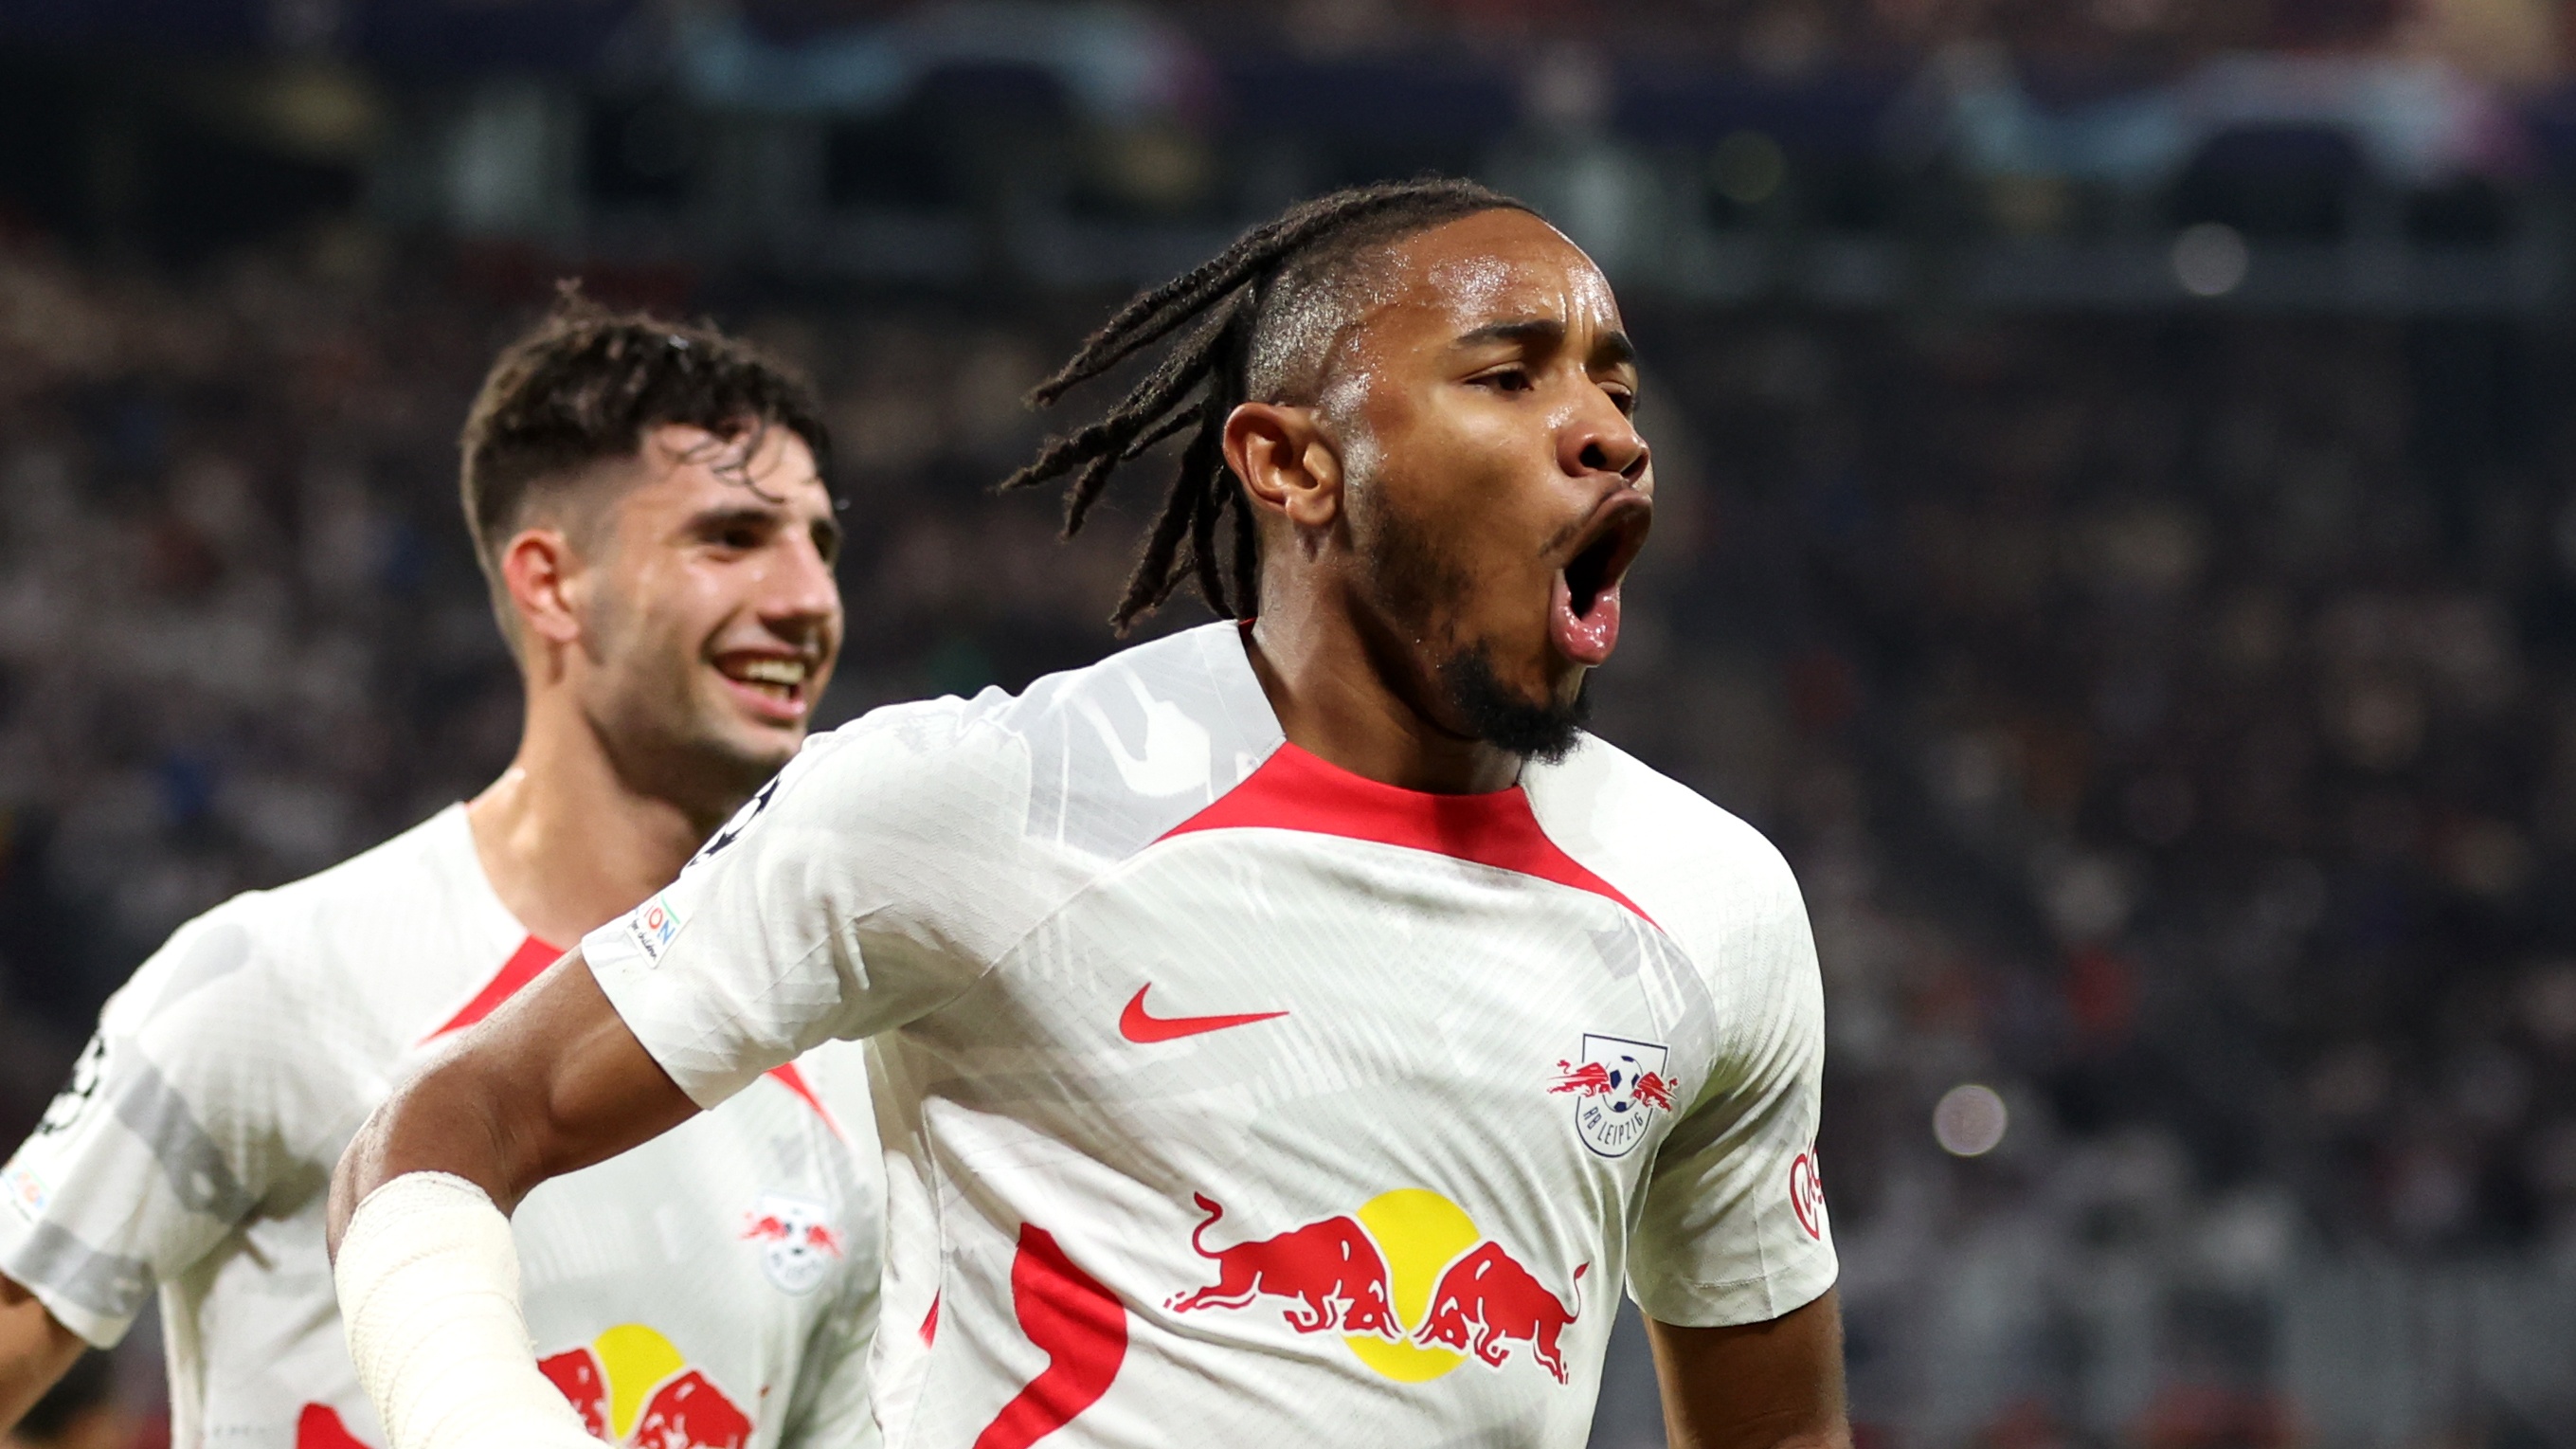 RB Leipzig vs Eintracht Frankfurt live stream how to watch DFB-Pokal final for FREE from anywhere today